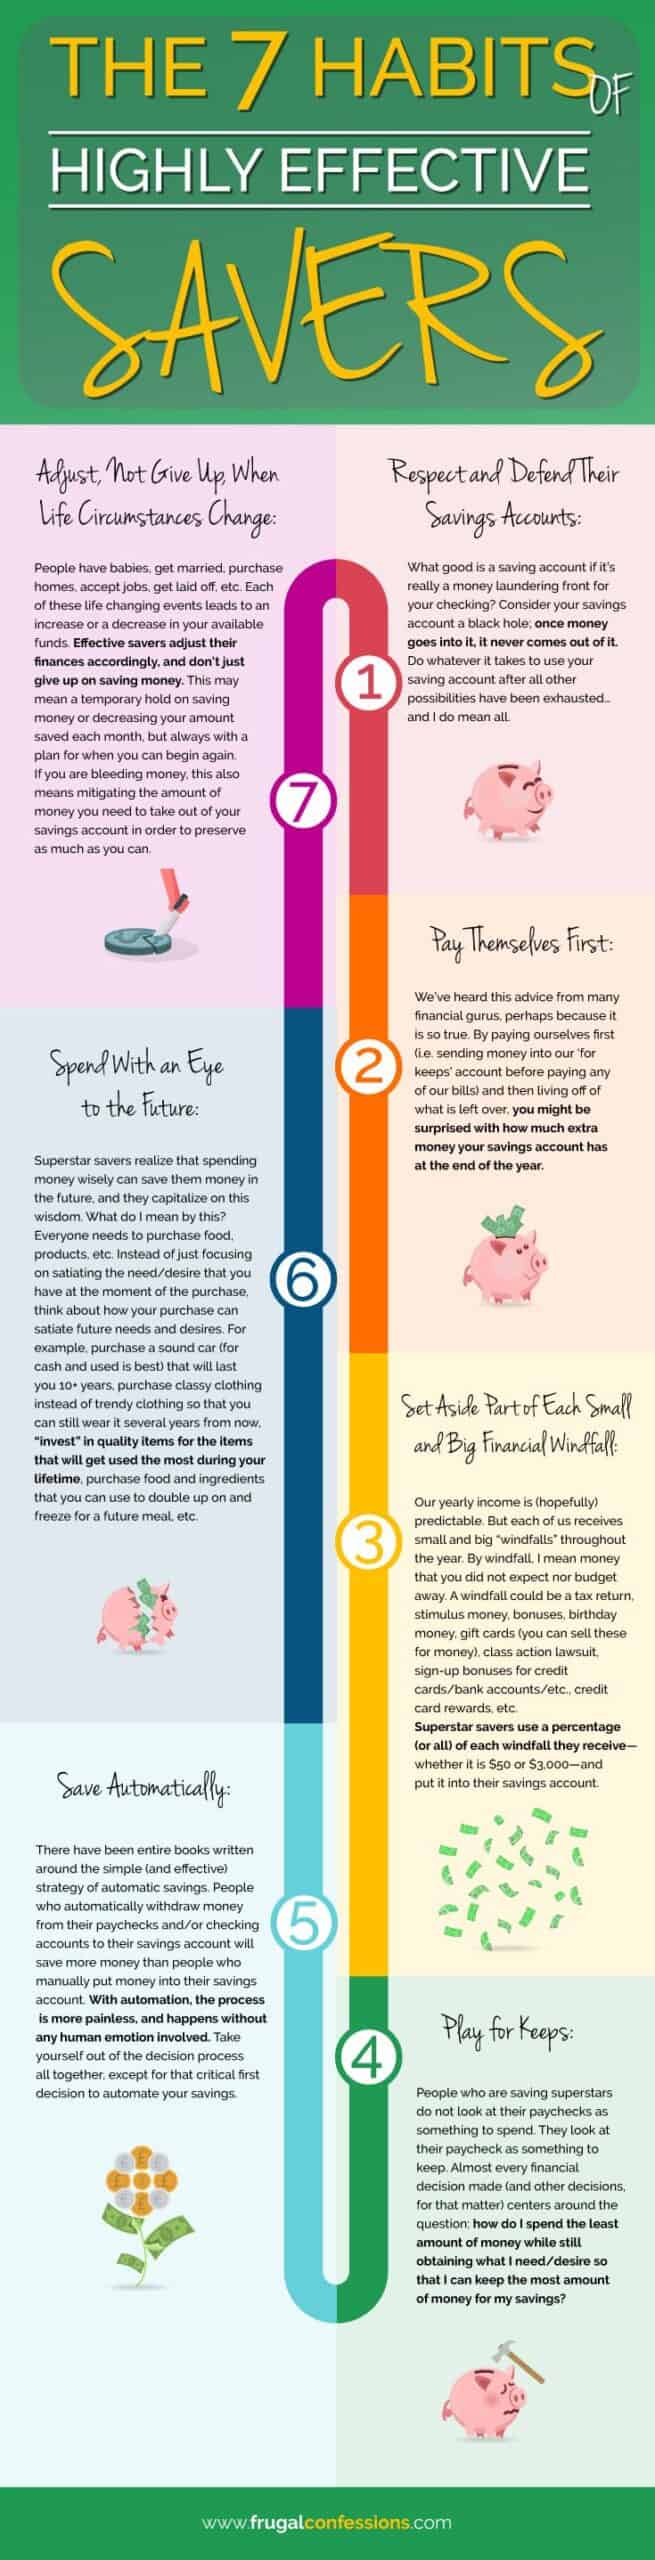 infographic of 7 habits of highly effective savers, with graphics throughout